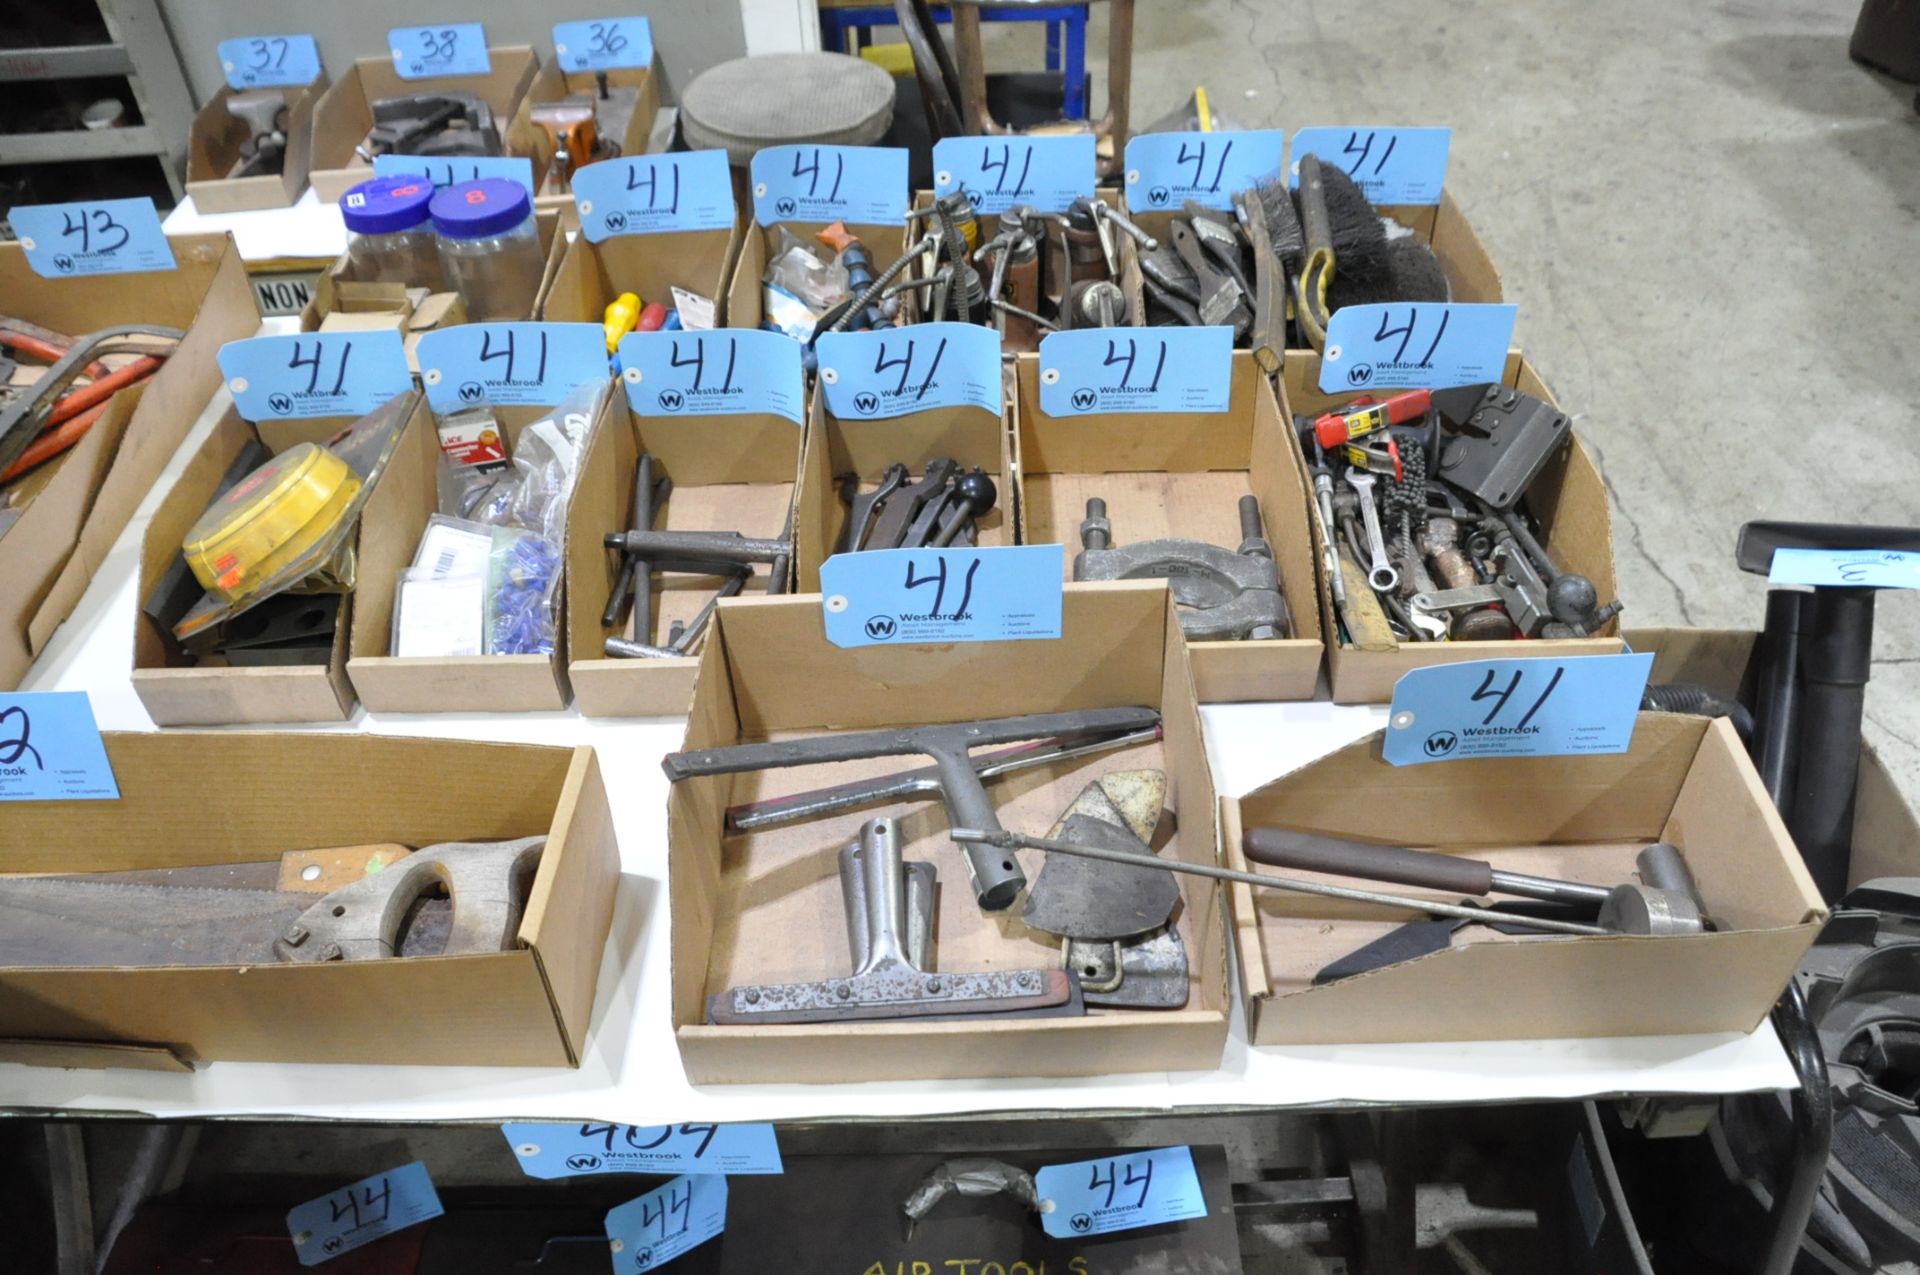 Lot-Squeegees, Brushes, Oil Squirt Cans, Machine Handles, Electric Connectors, Smoke Detector, Etc.